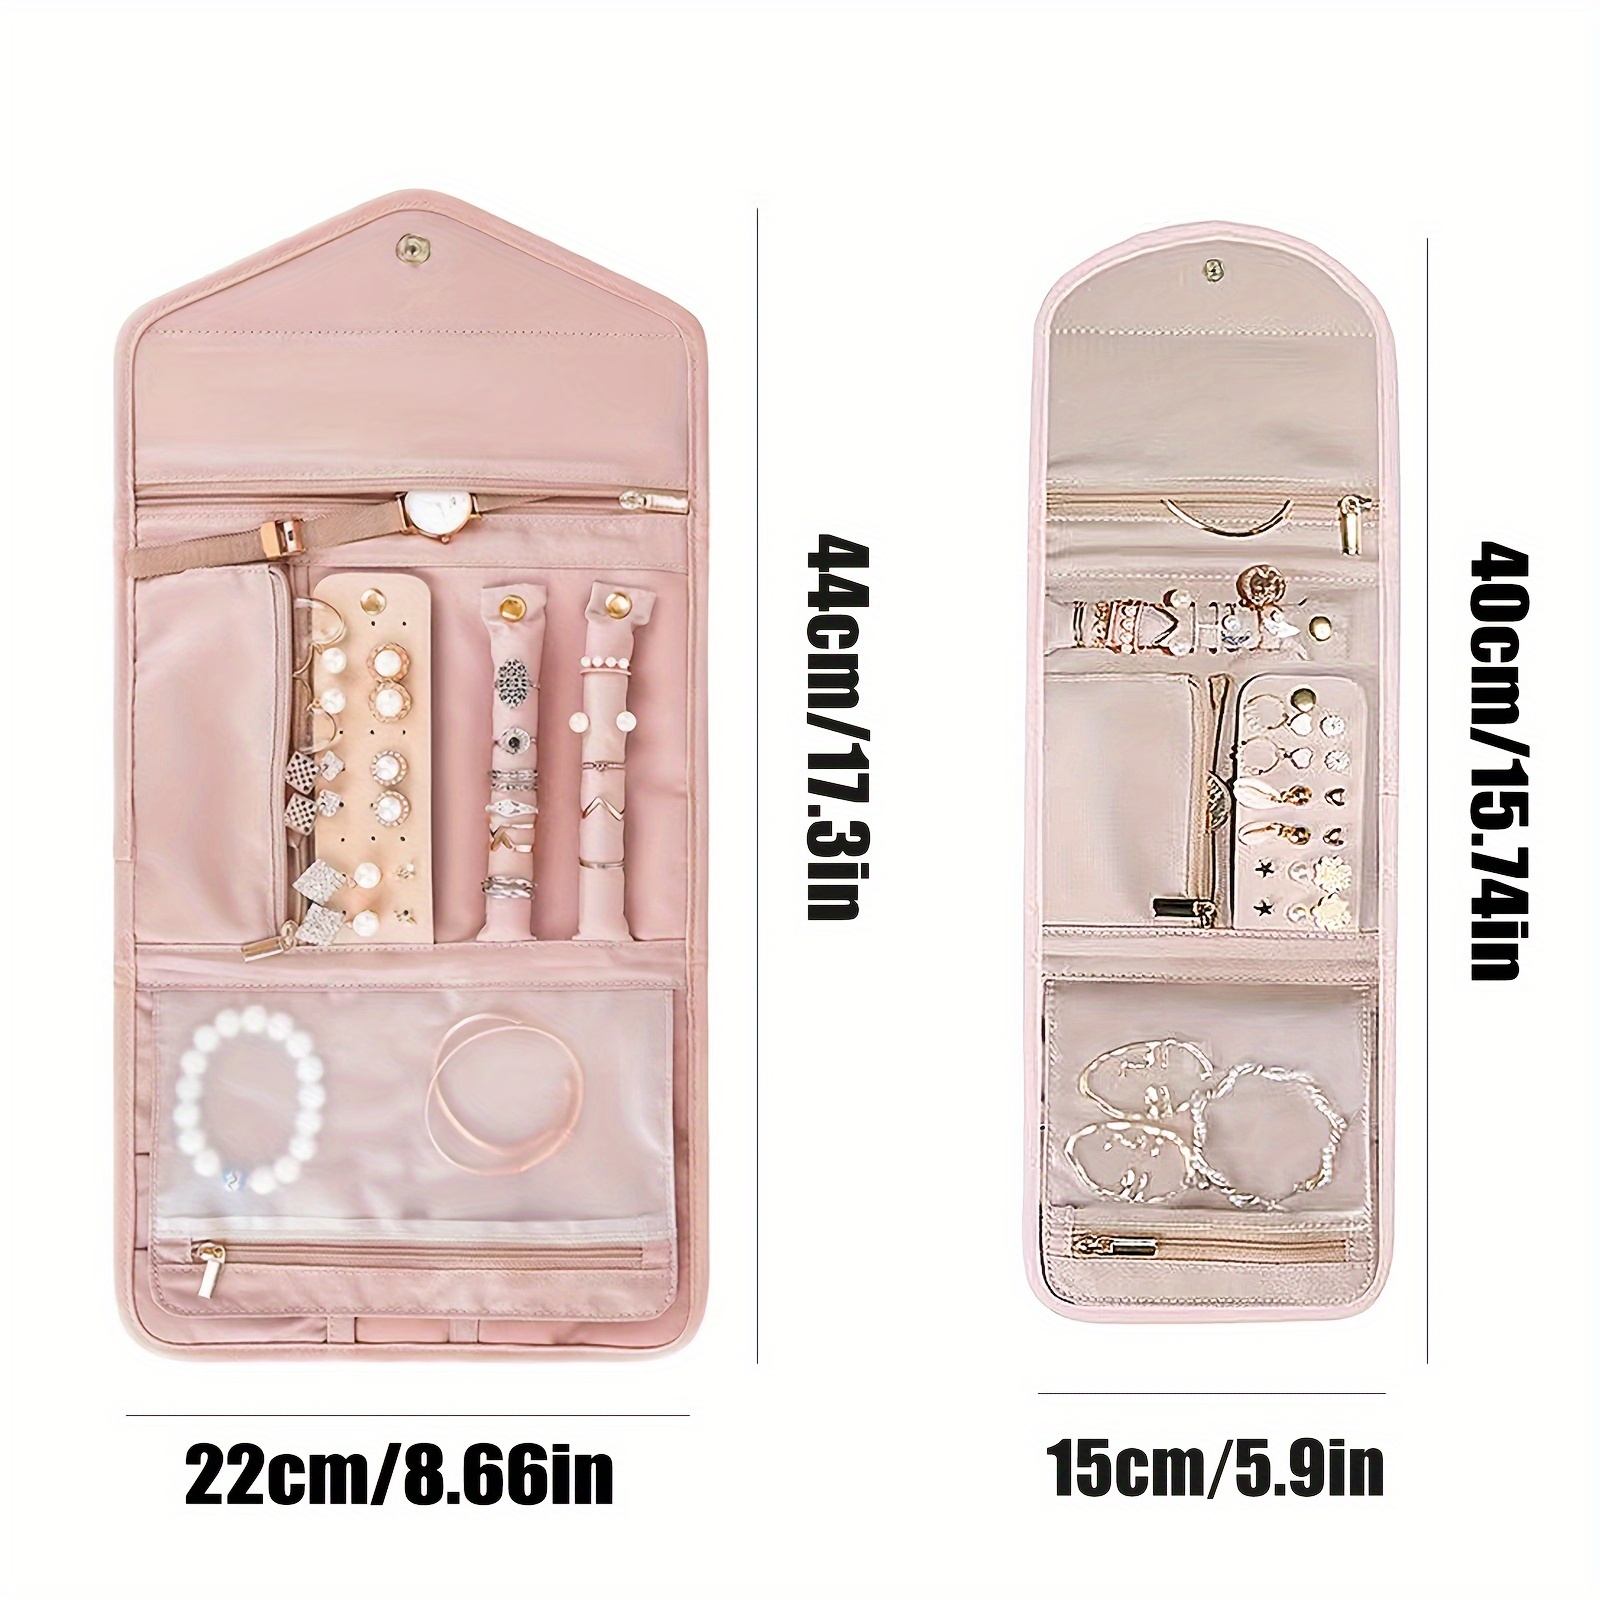 BAGSMART Travel Jewelry Organizer Case Foldable Jewelry Roll for  Journey-Rings, Necklaces, Earrings, Bracelets,Mini,Soft Pink